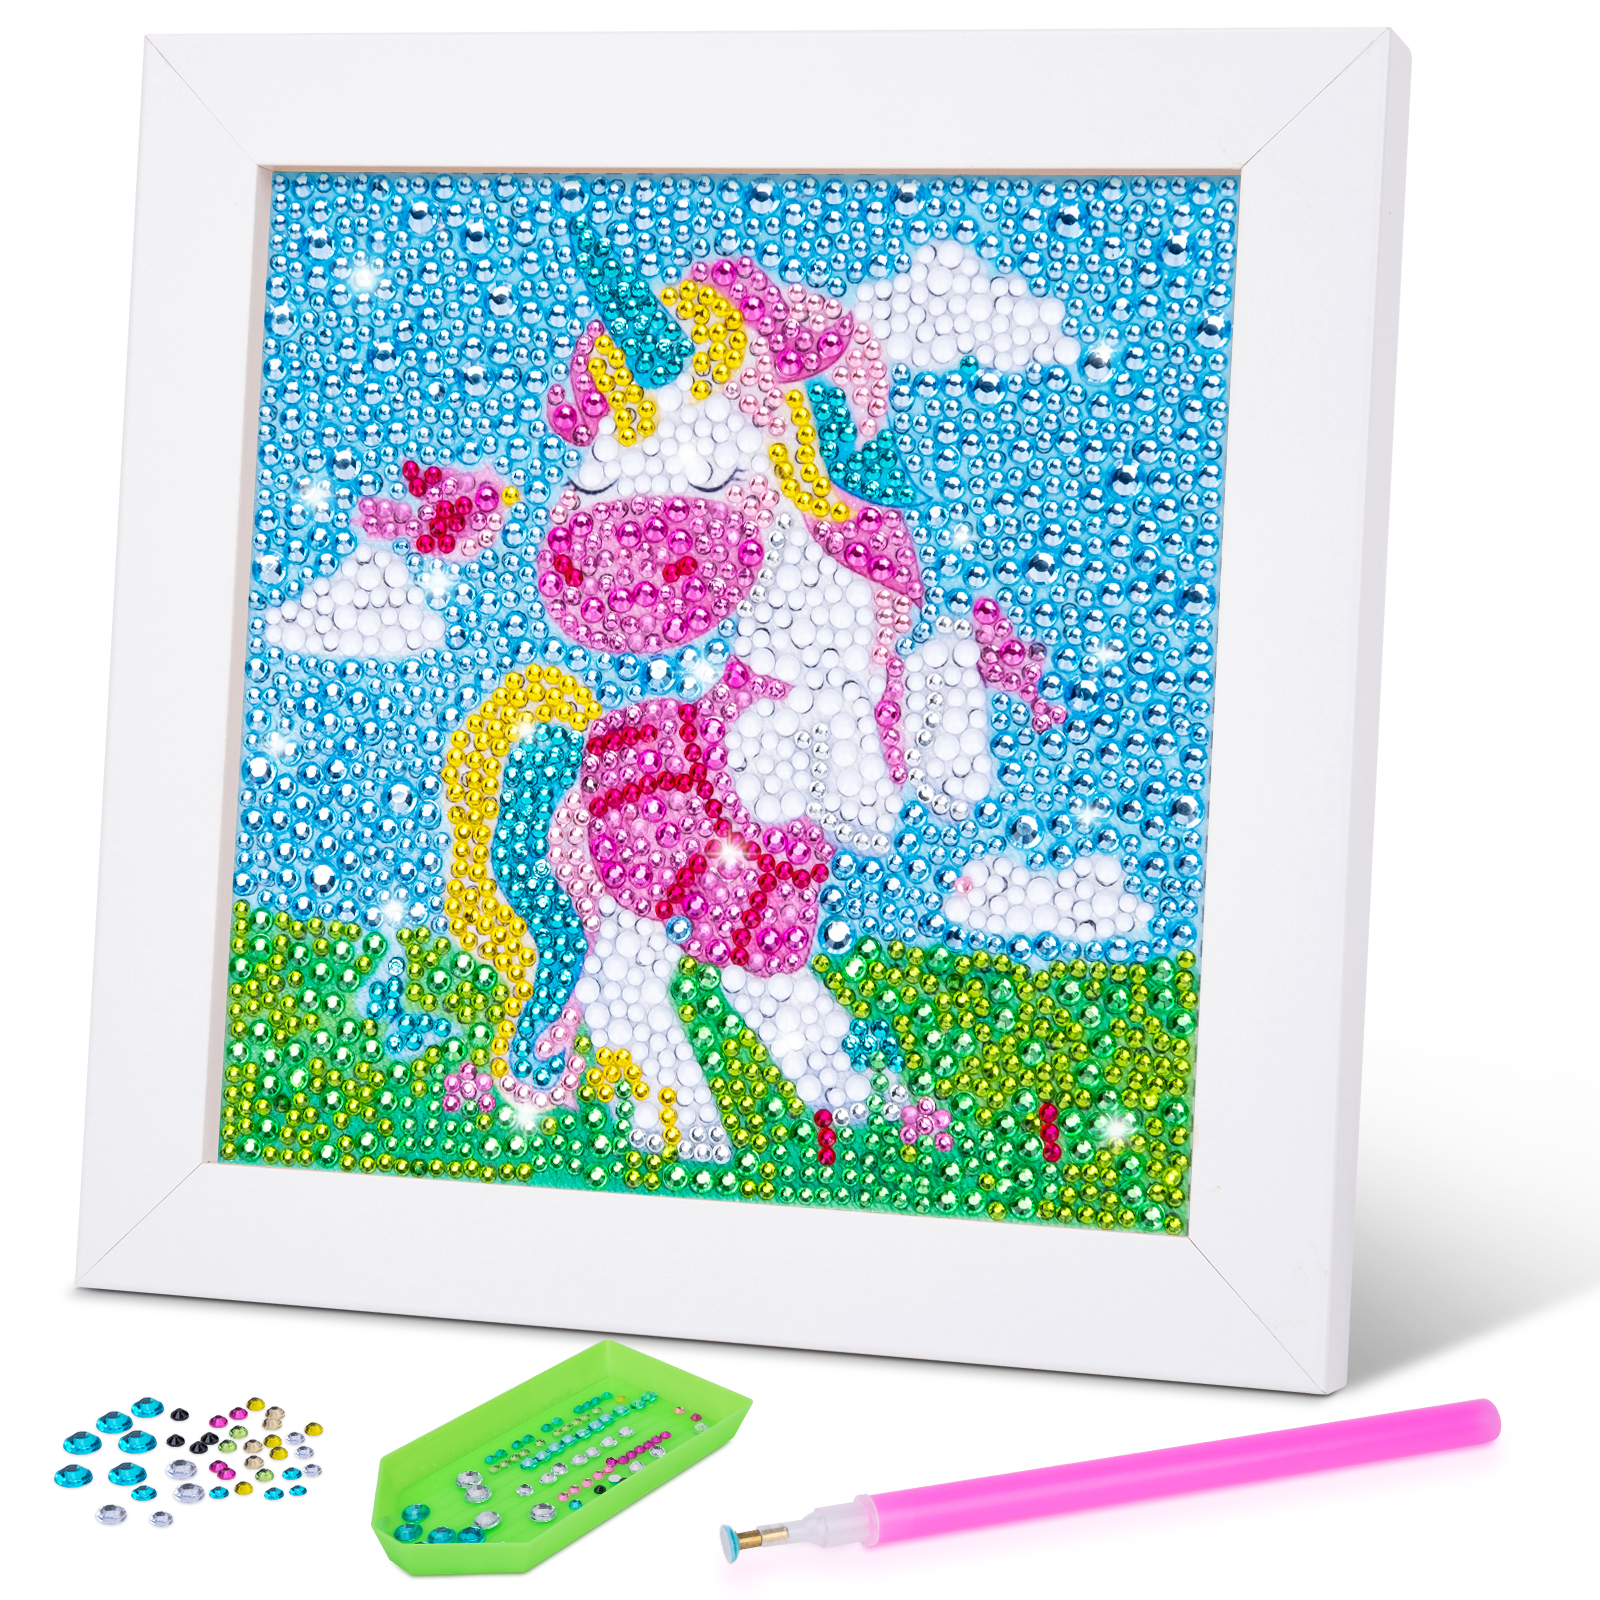 SUNNYPIG Unicorn Painting Kit for Girl Age 6 7 Craft Supply for